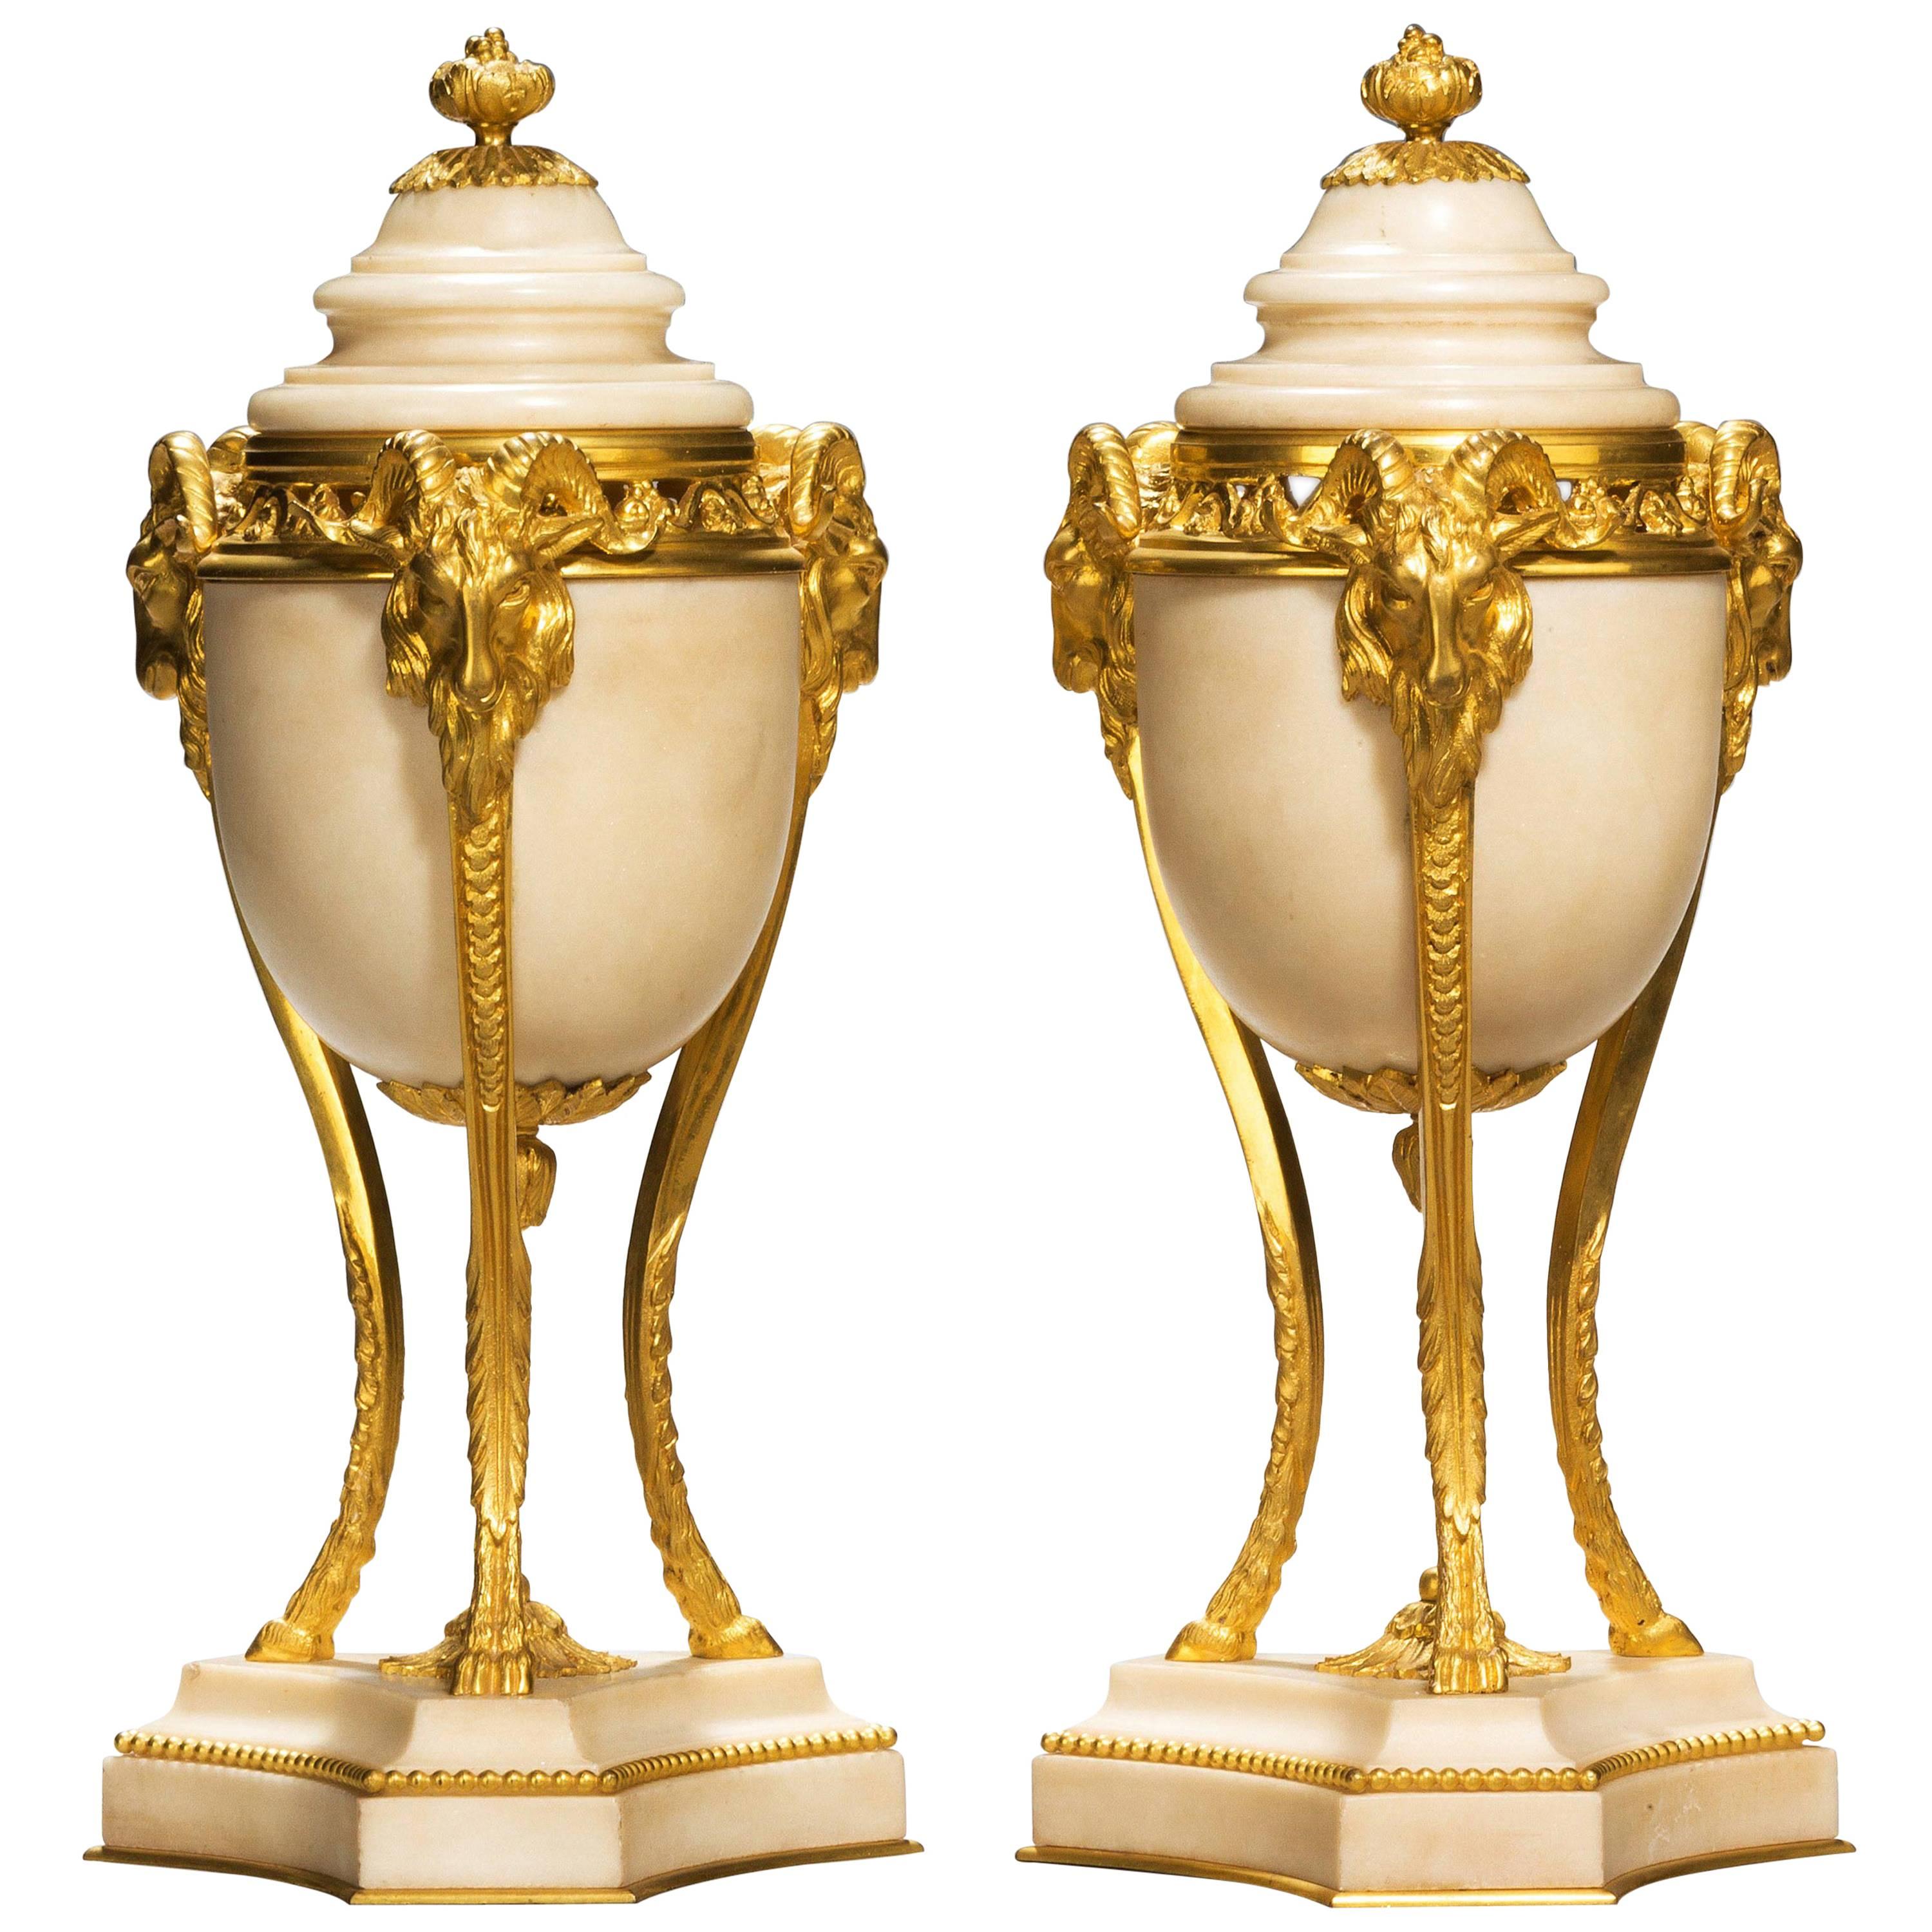 Pair of Early 20th Century French Gilt Bronze and Marble Lidded Vases